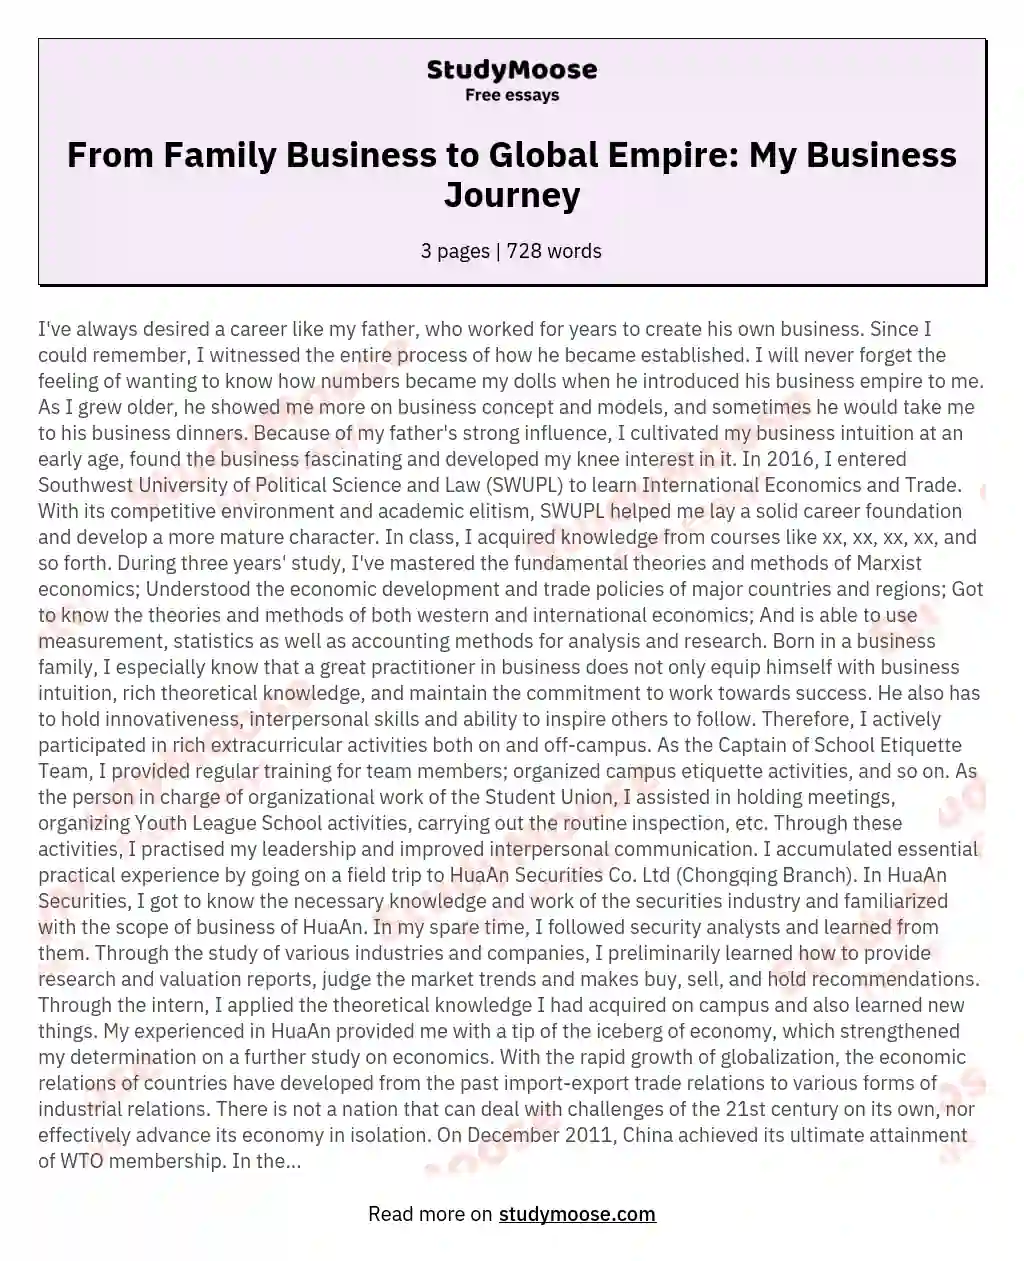 From Family Business to Global Empire: My Business Journey essay